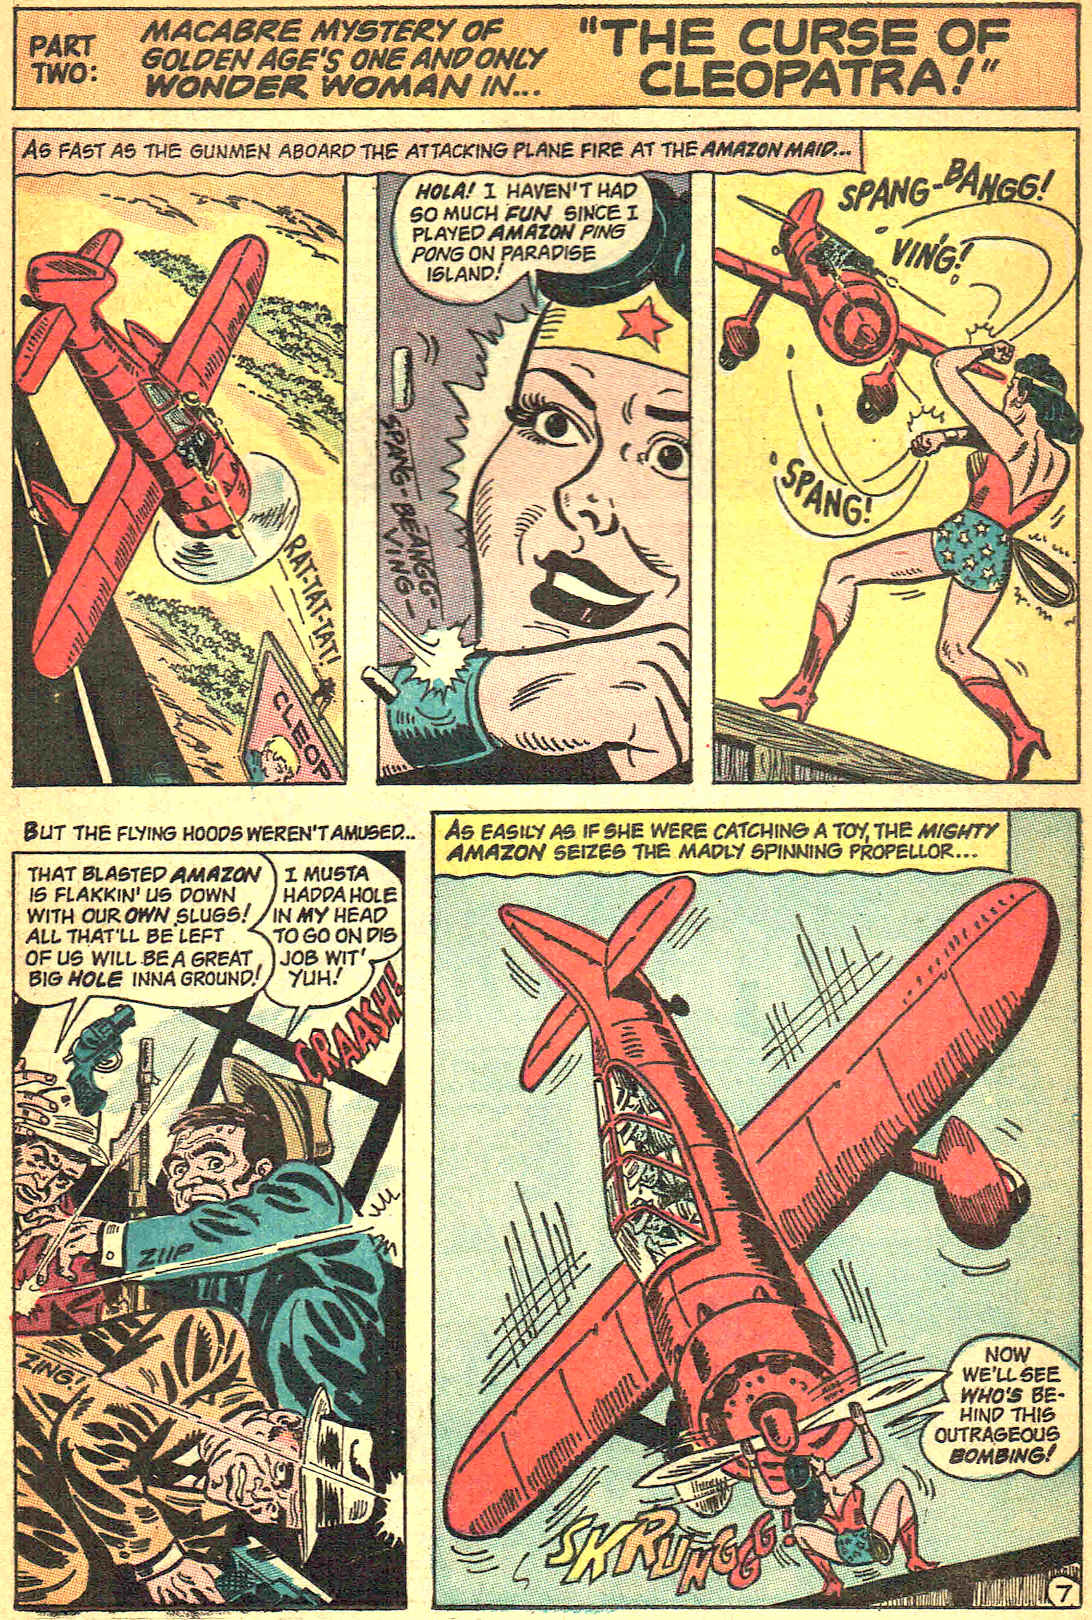 Wonder Woman rebounds bullets to the hoodlums, then catches the aircraft by its propeller